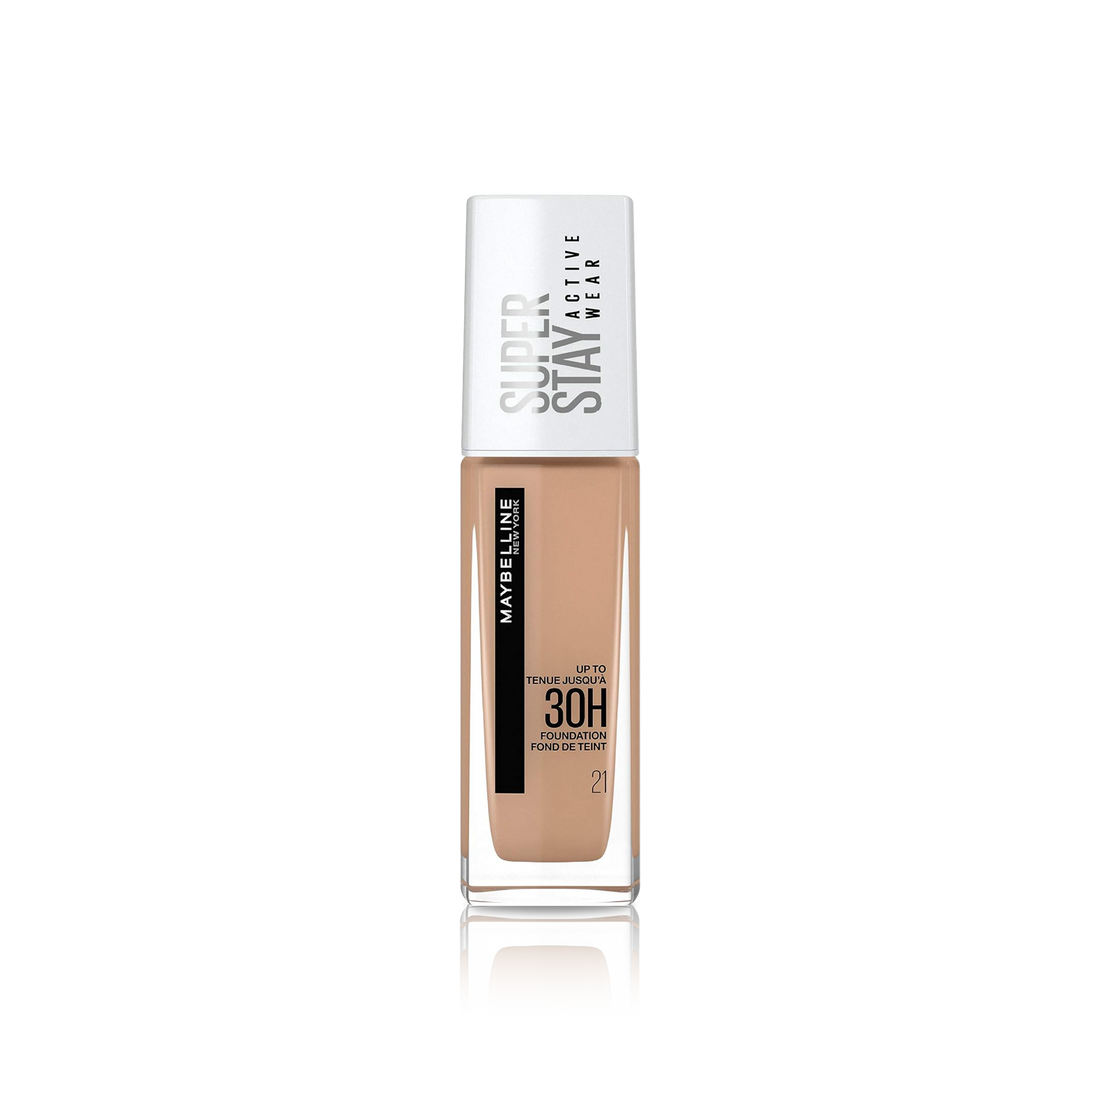 Super Stay Active Wear Full Coverage 30 Hour Long-Lasting Liquid Foundation